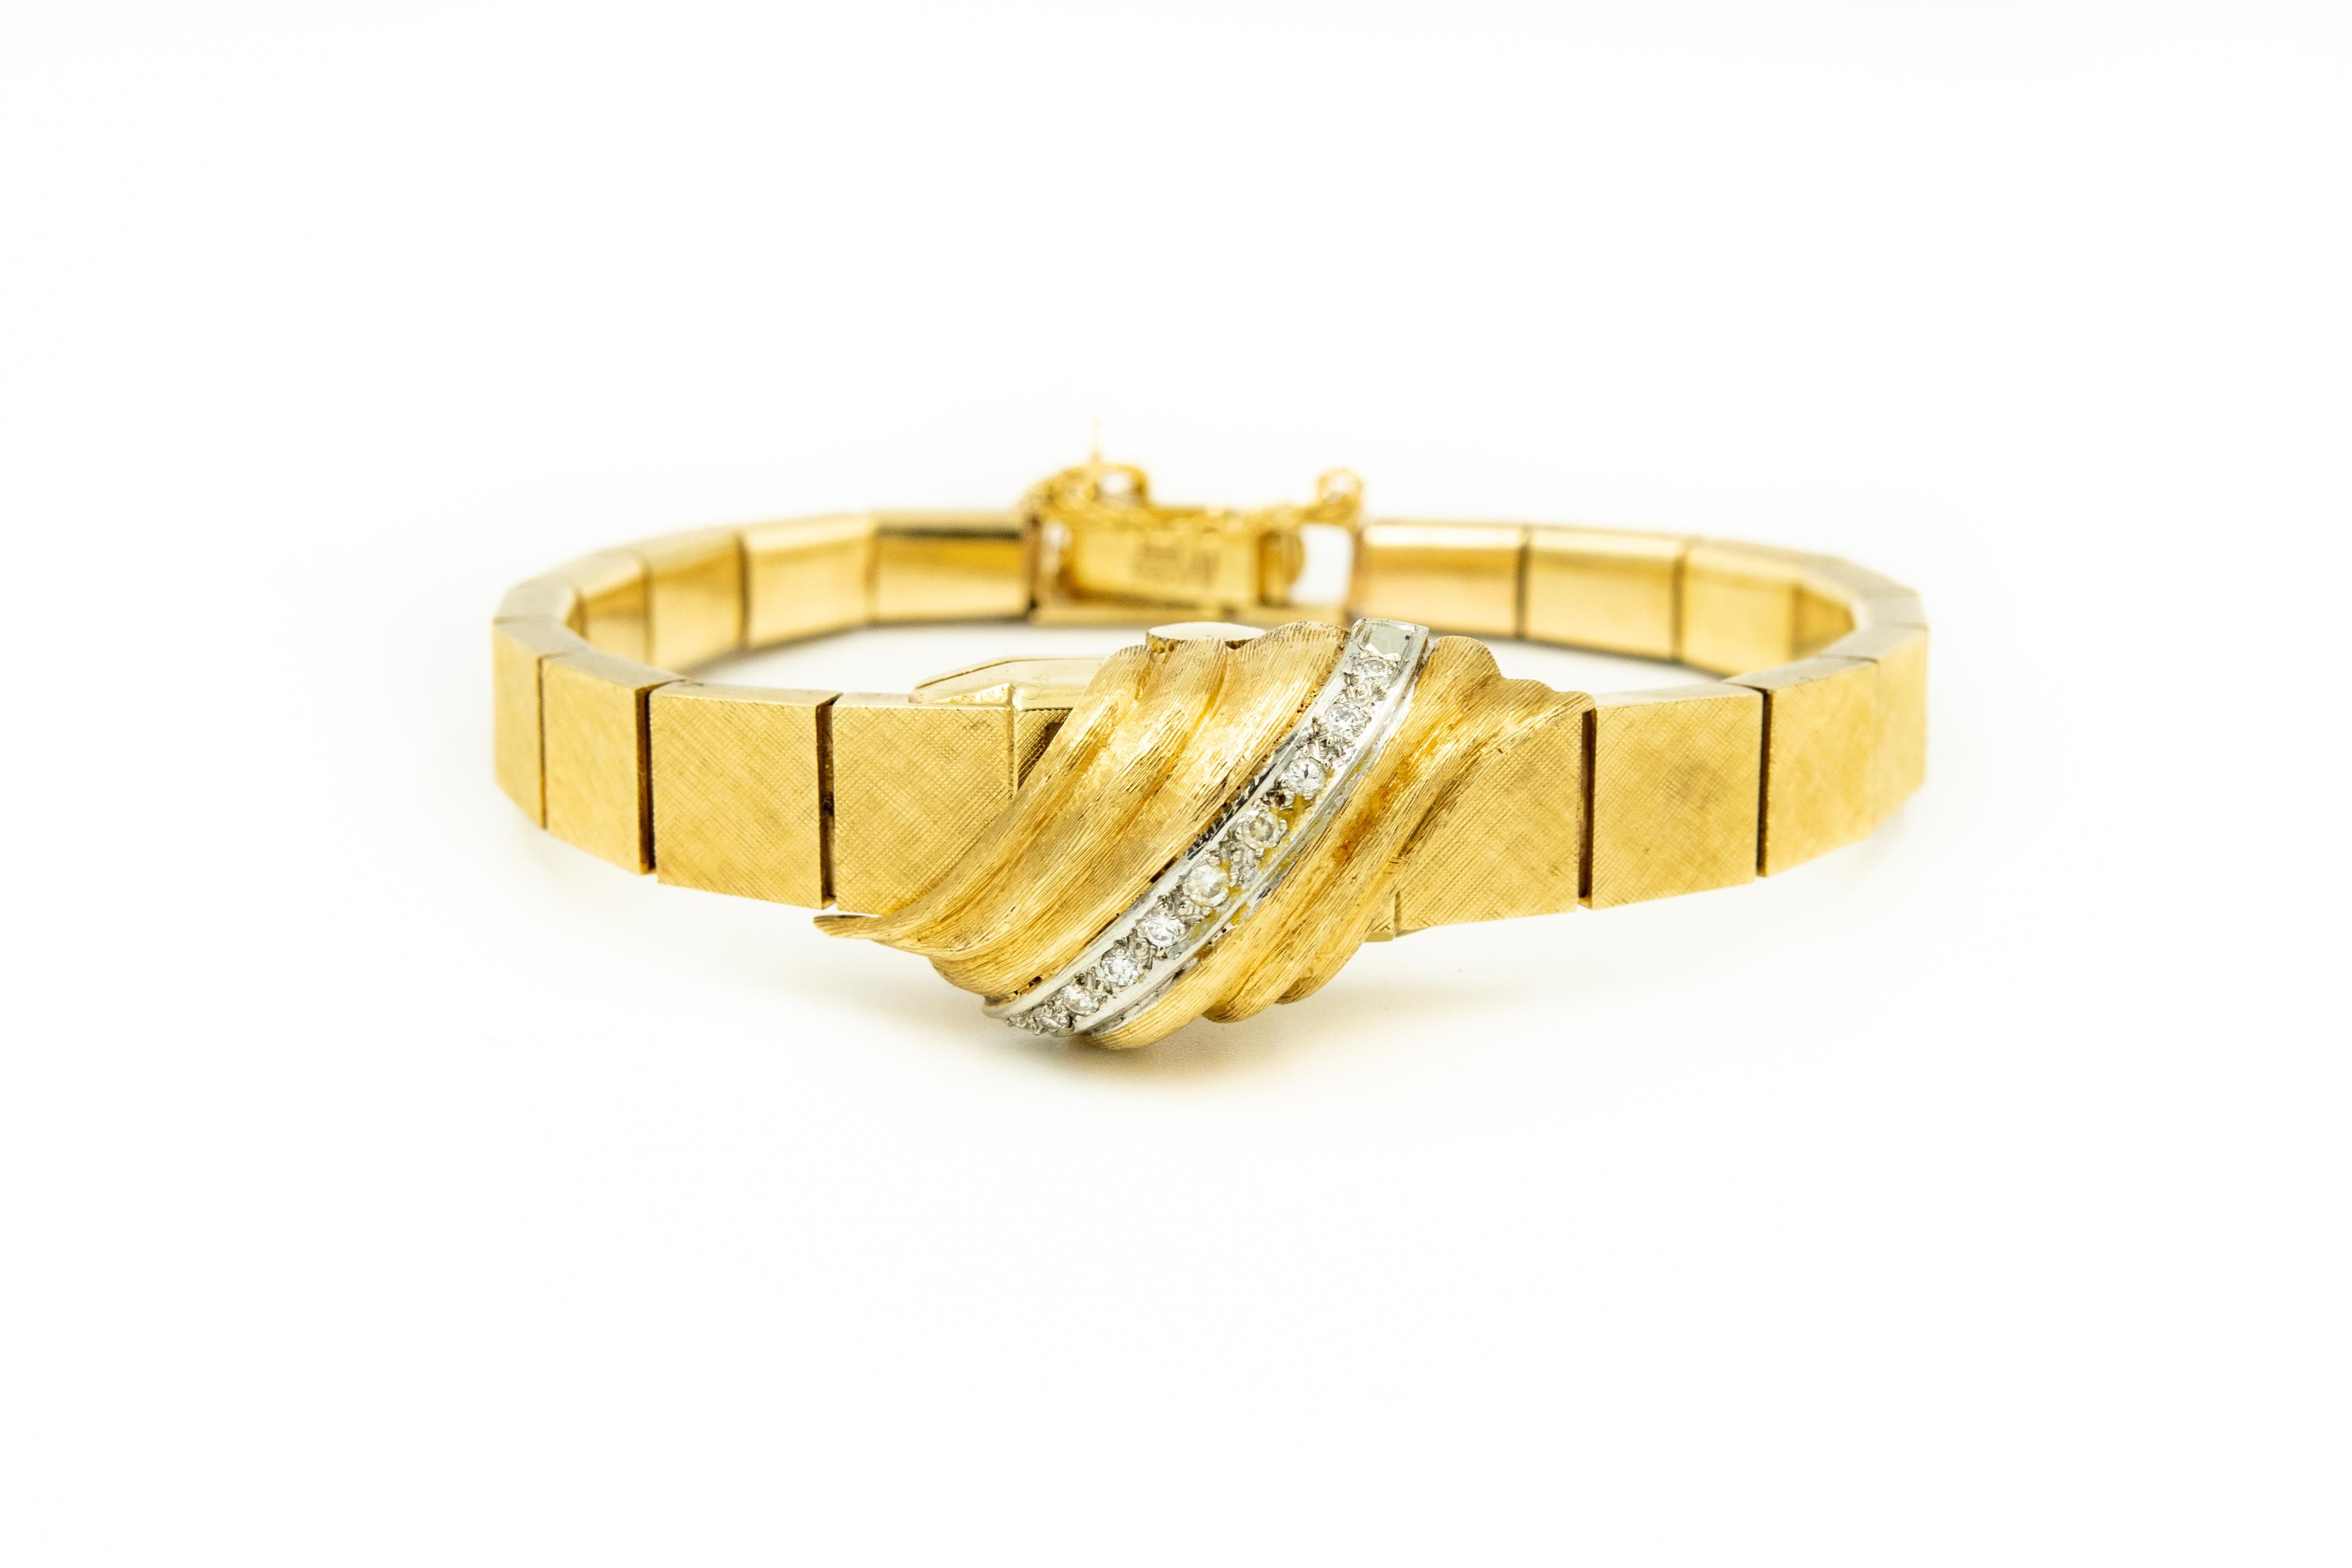 Mid 20th century 14k yellow gold watch with a diagonal row of 9 x .01 c. each single cut diamonds for an approximate total weight of  .09 carats.  The cover hinges up to reveal the time.  It has a mechanical movement which means you mush wind it